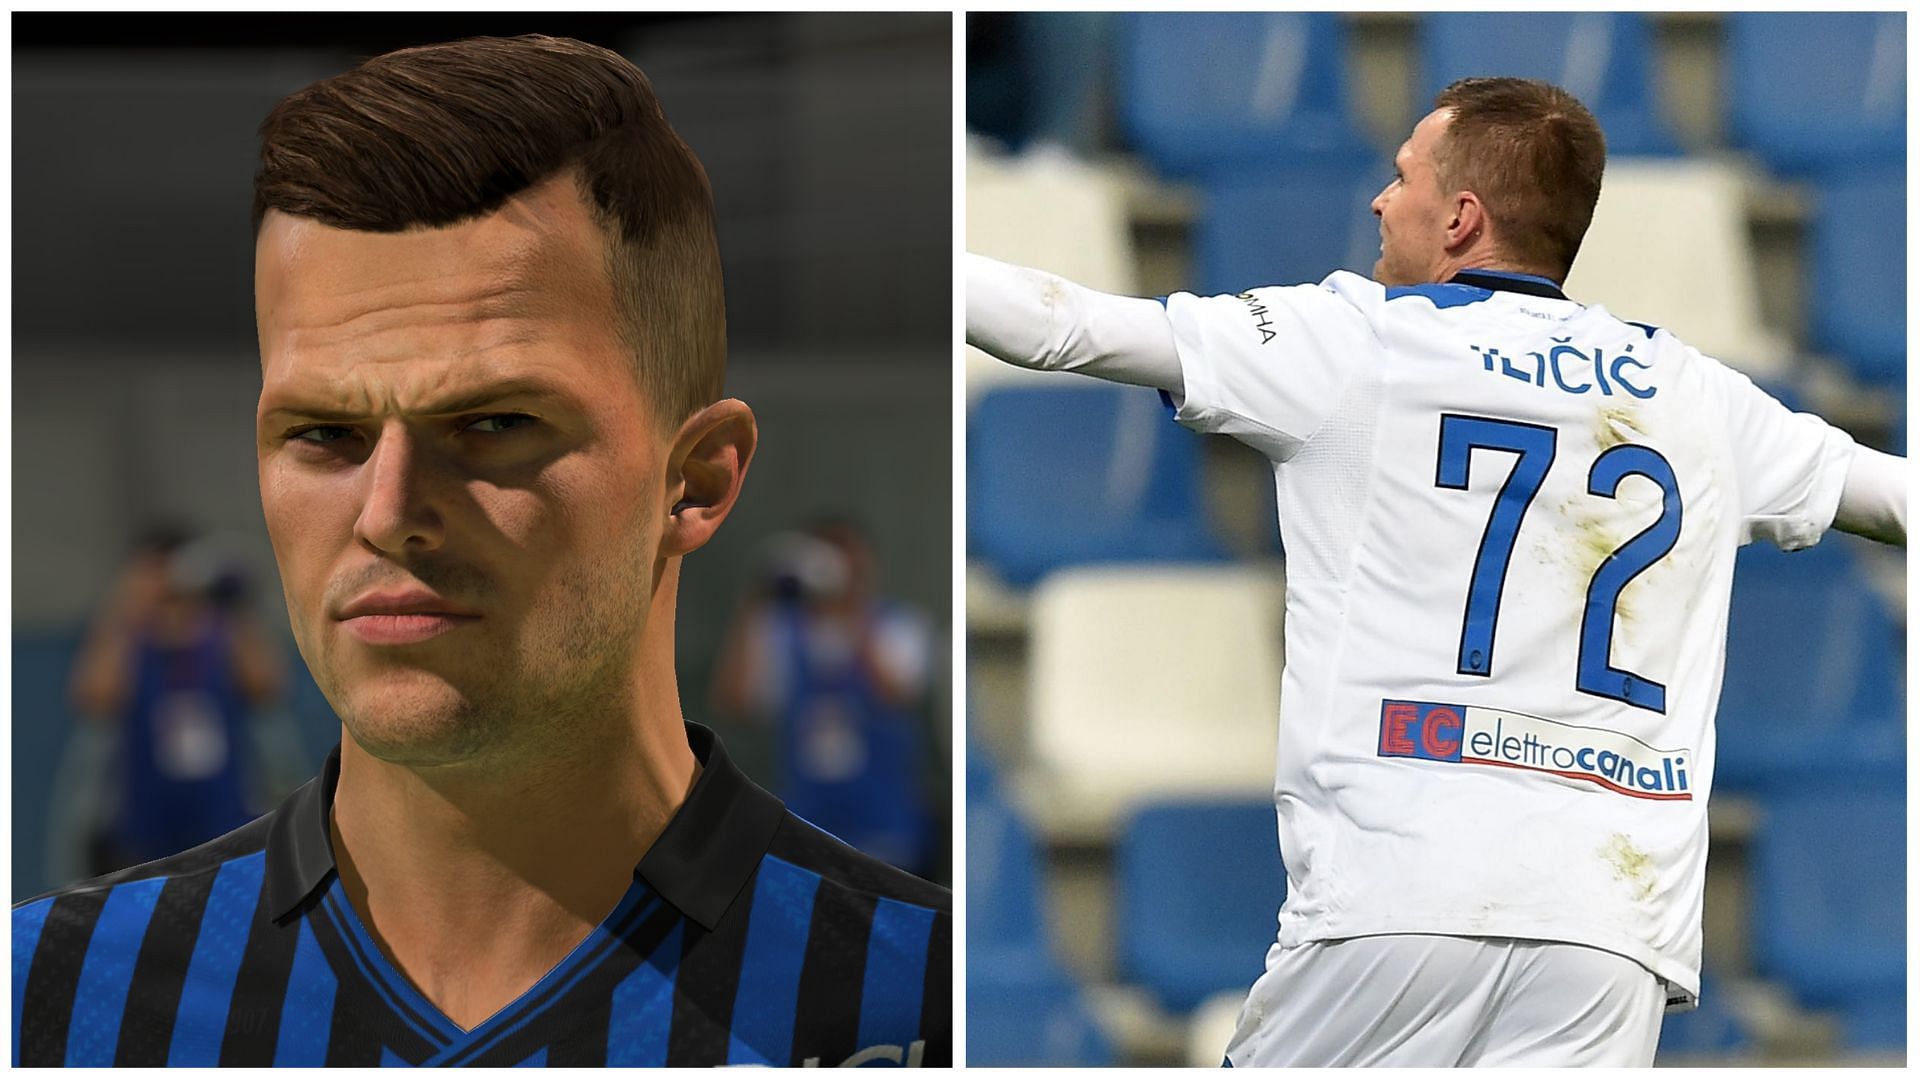 Josip Ilicic could return to the FIFA series (Images via EA Sports and Getty Images)